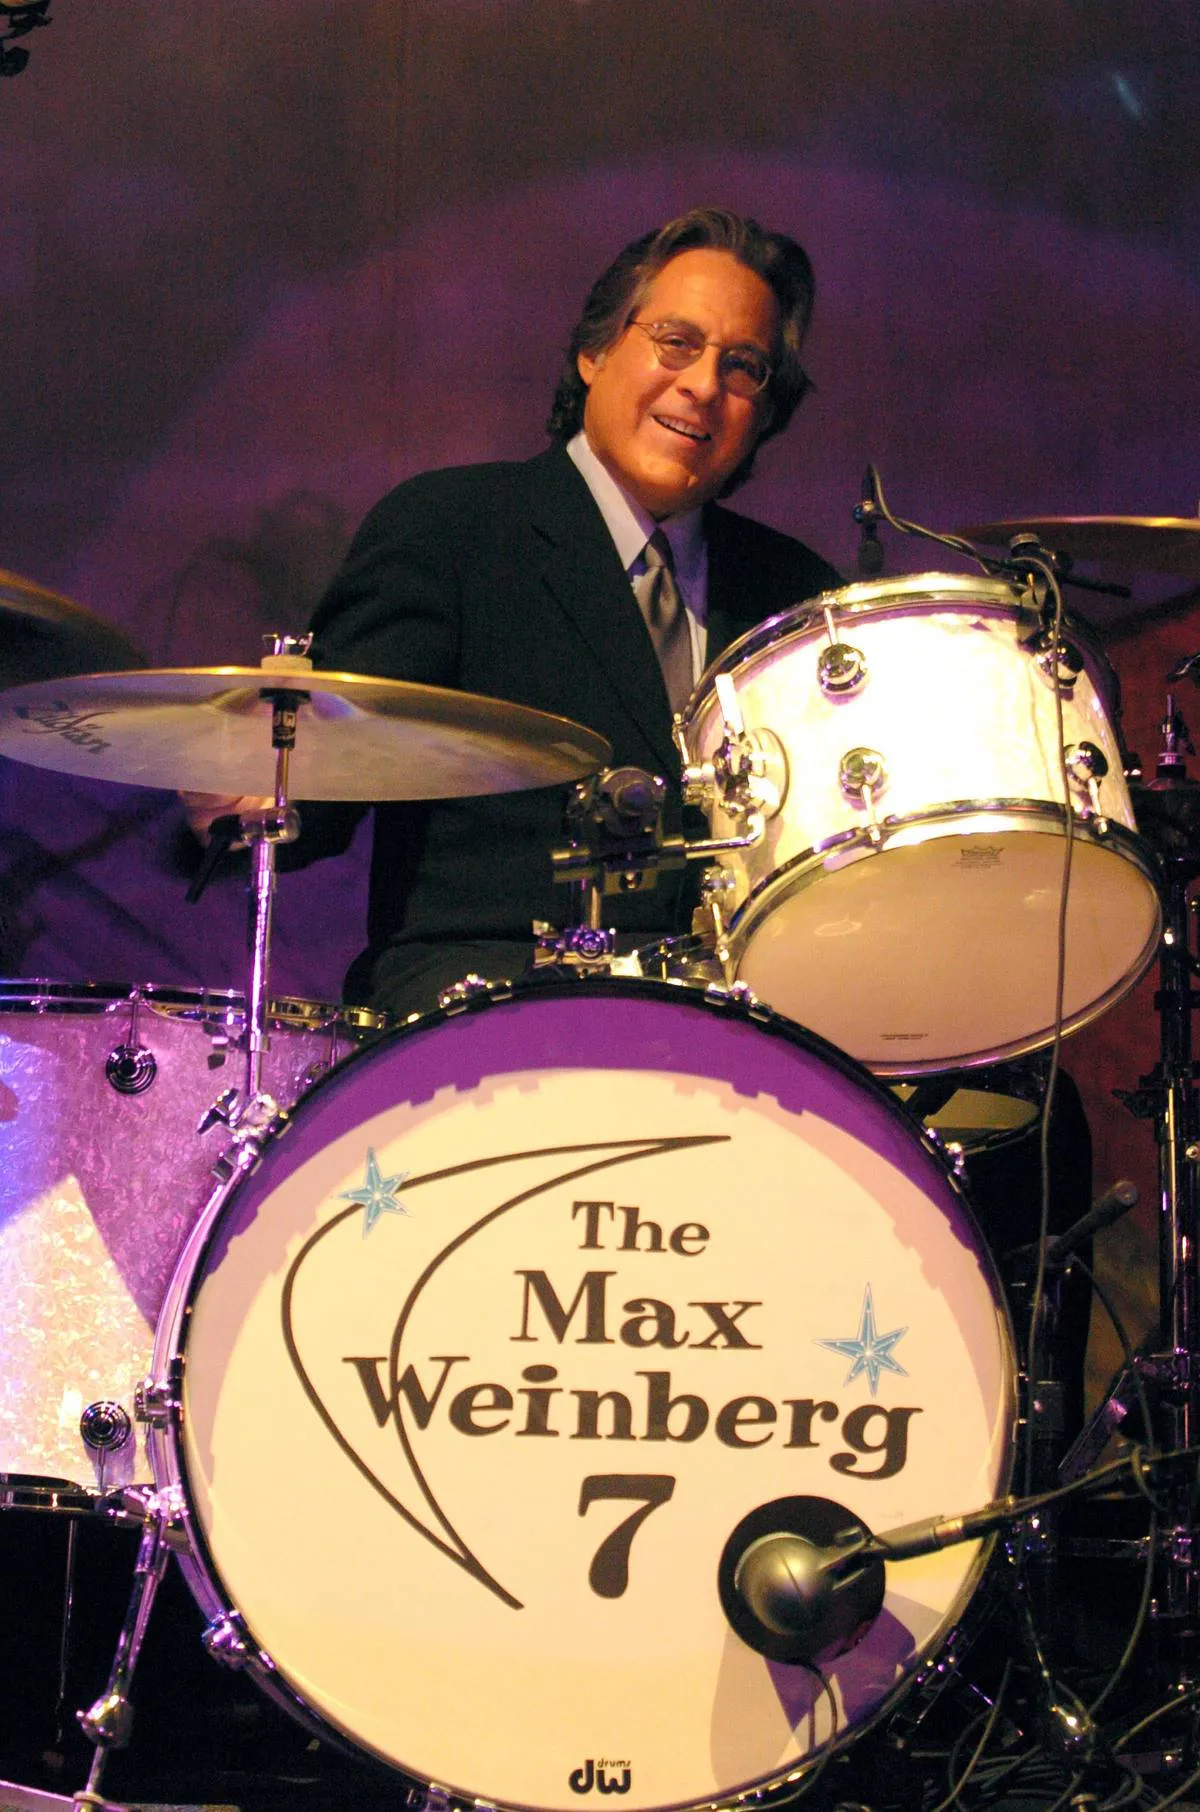 Max Weinberg Put Together The Infamous Max Weinberg 7